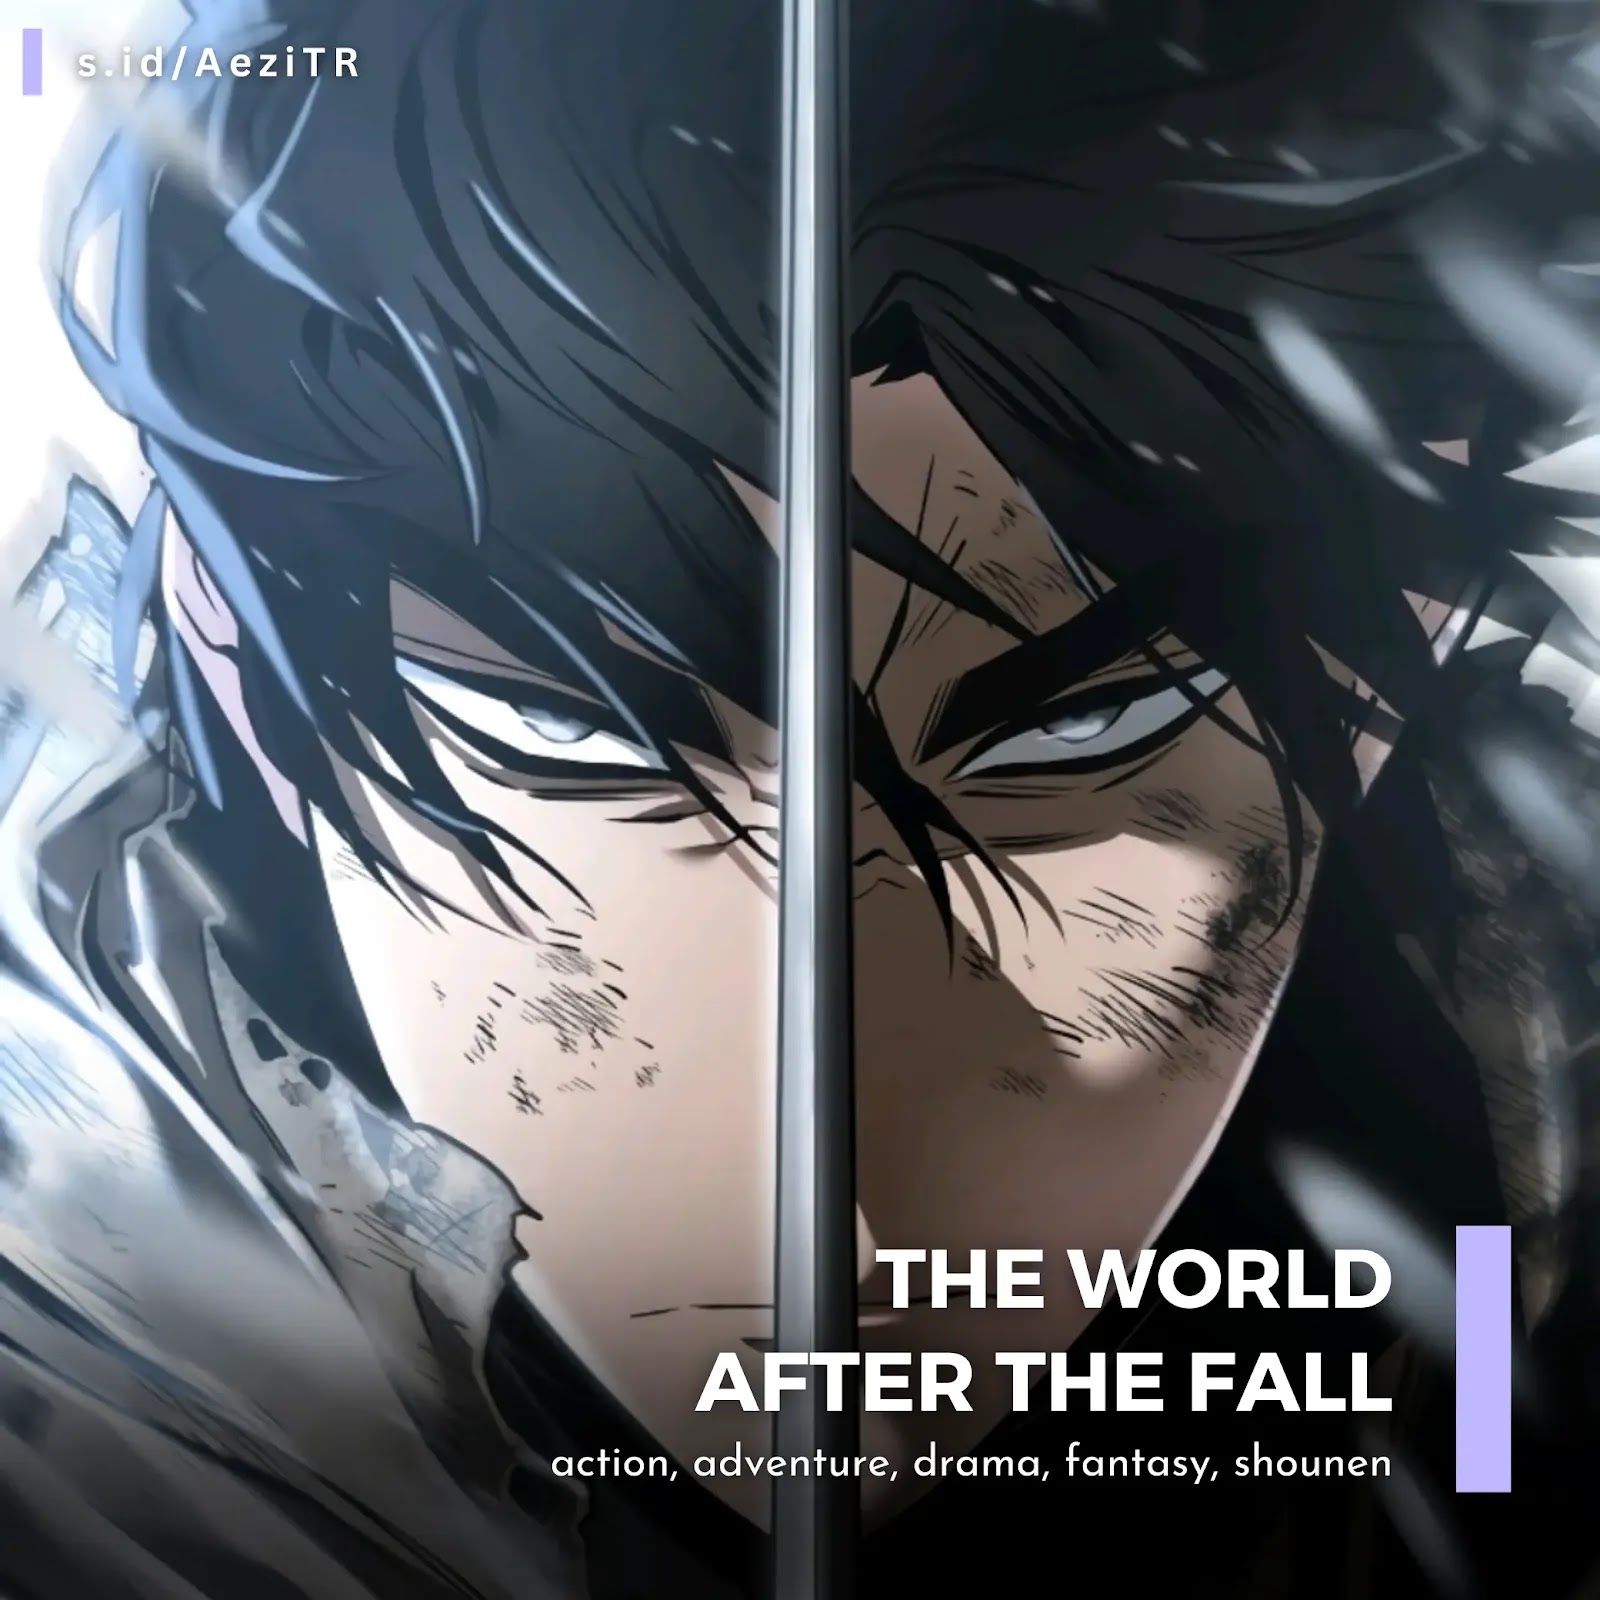 Review The World After the Fall; The Post-Destruction World; The World After Destruction; The World After the End - Rekomendasi Manhwa Terbaik Tahun 2022 -@aezife